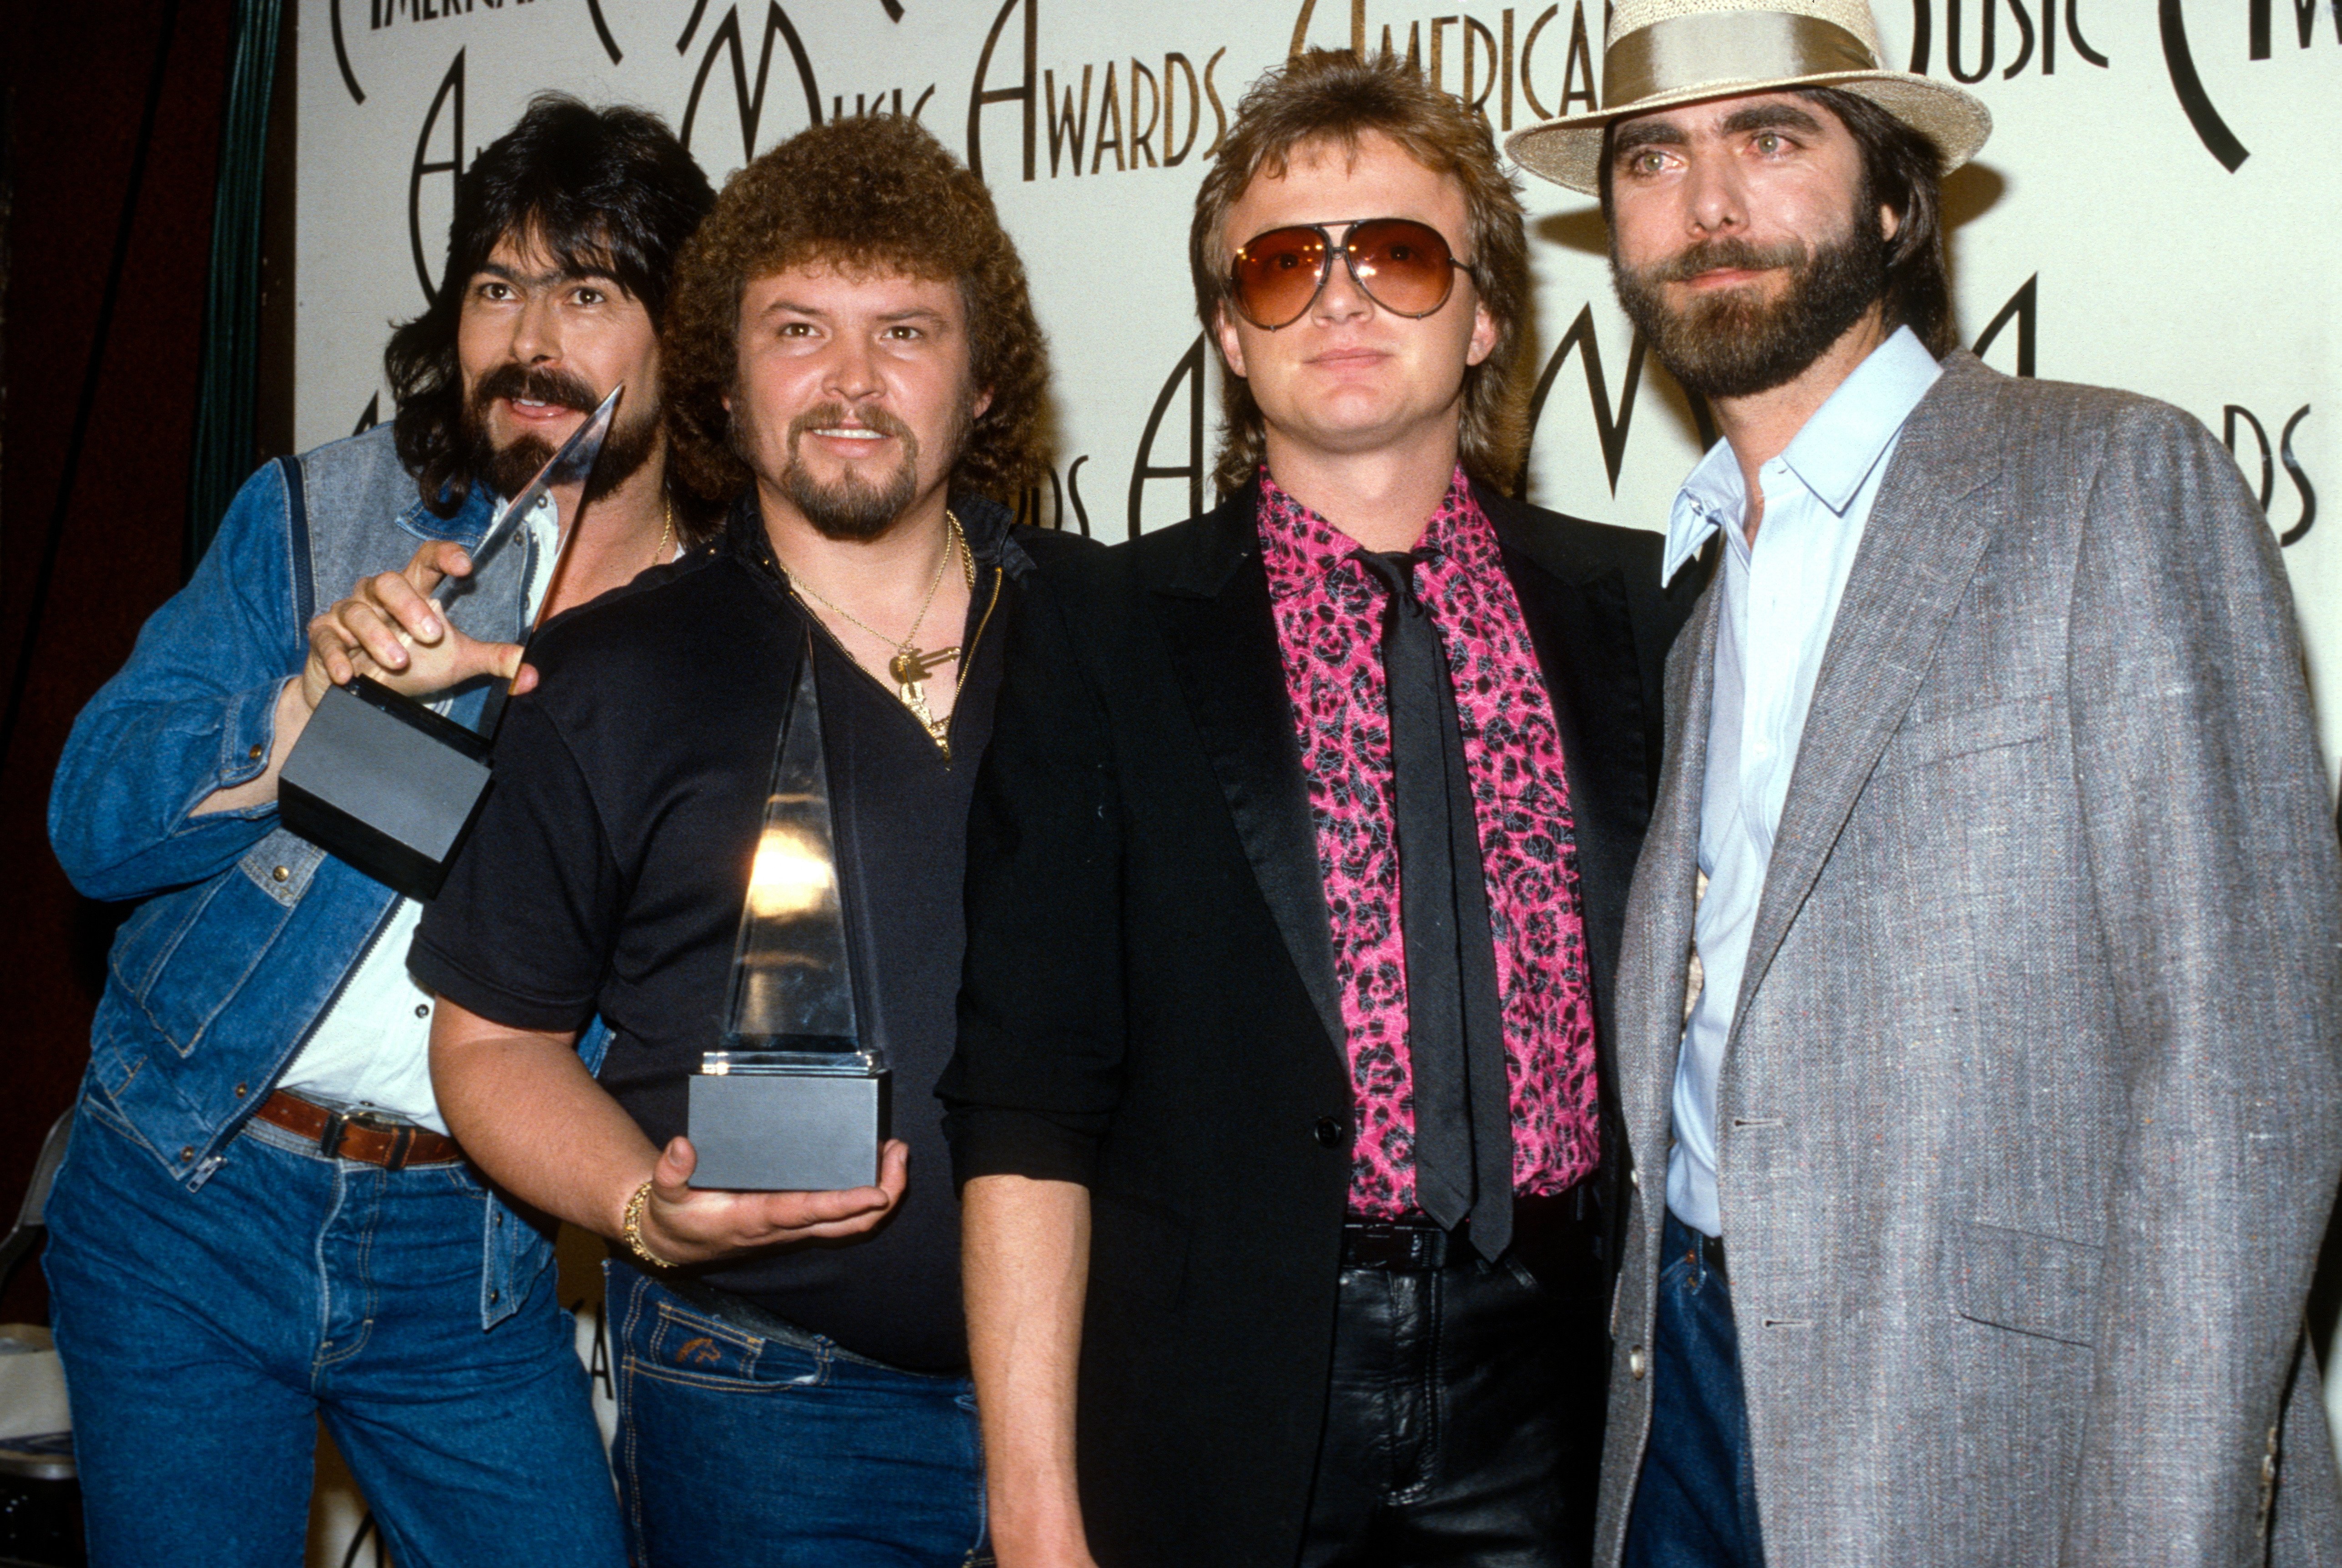 Randy Owen, Jeff Cook, Mark Herndon, and Teddy Gentry of Alabama at the American Music Awards circa 1985 | Source: Getty Images